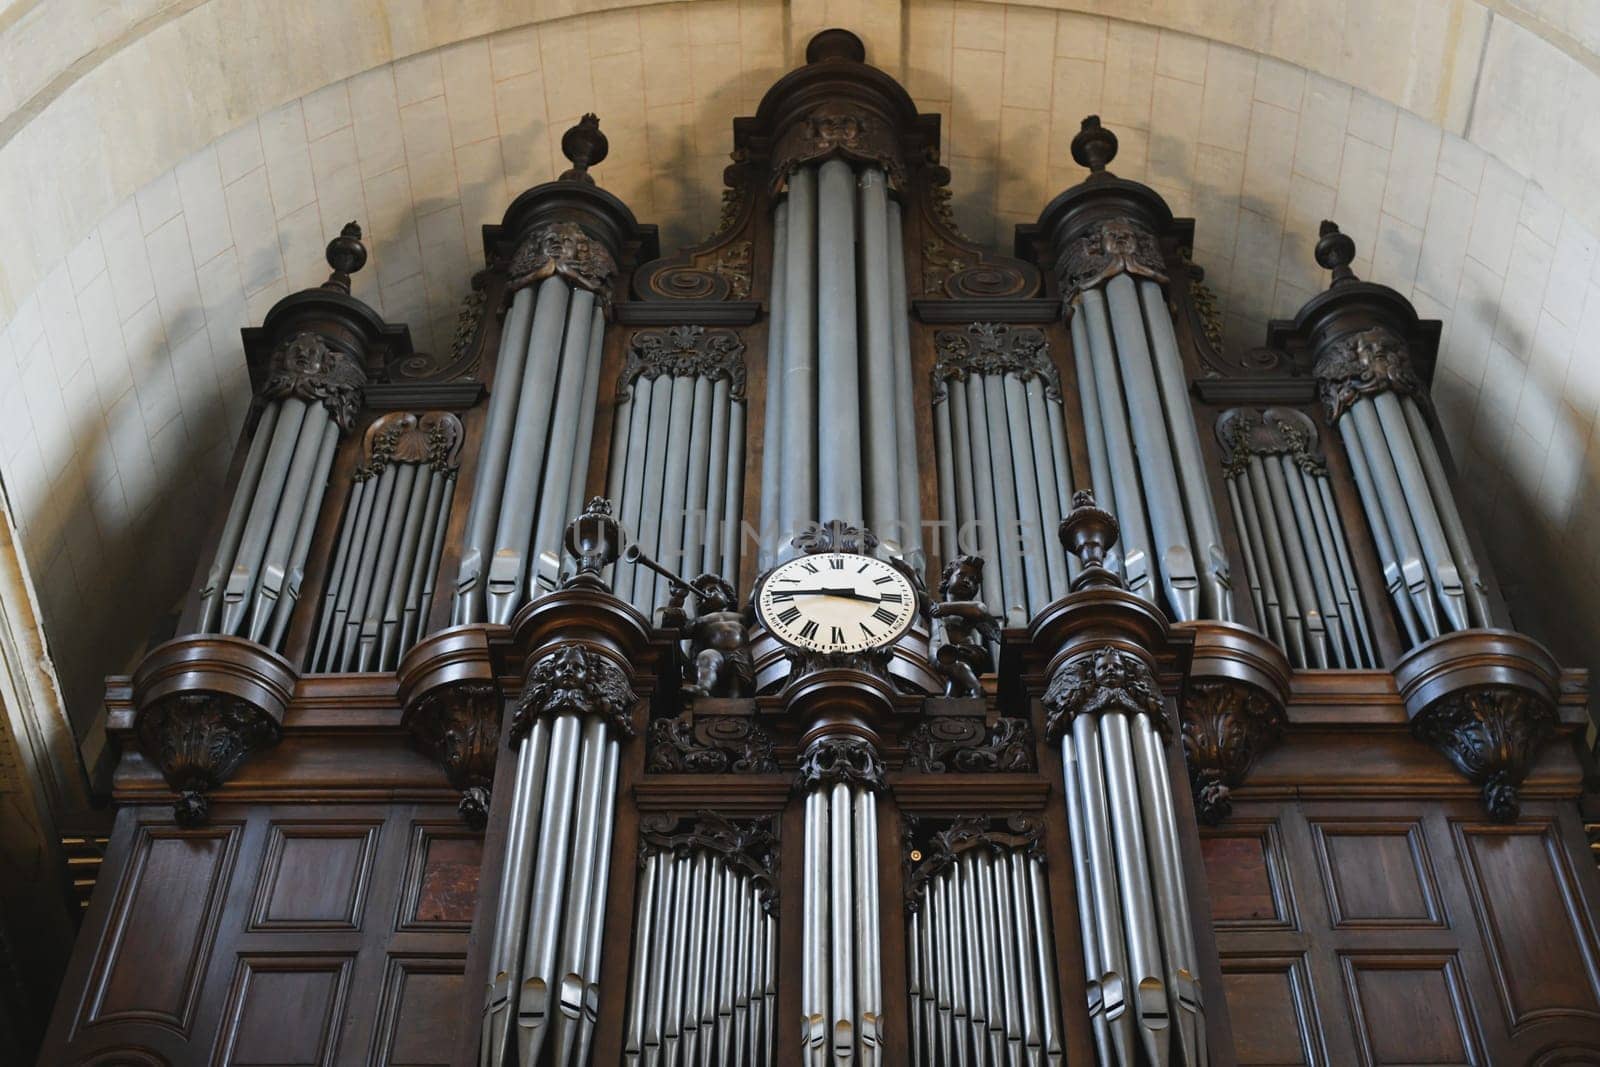 The organ in the church and the carved old wood around by Godi